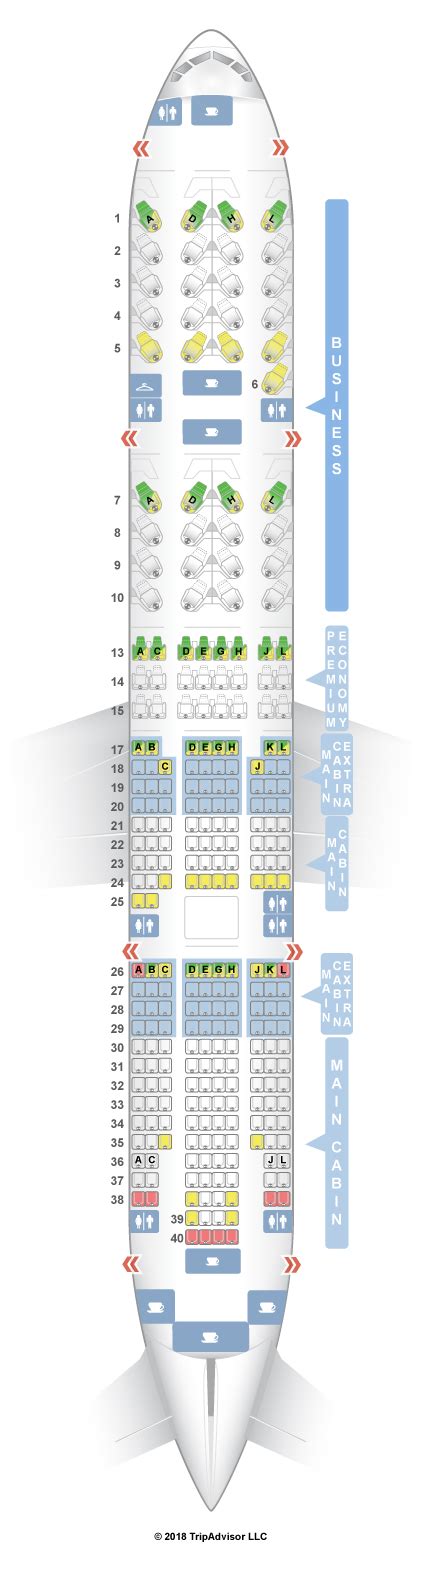 American Airlines Seating Chart Boeing